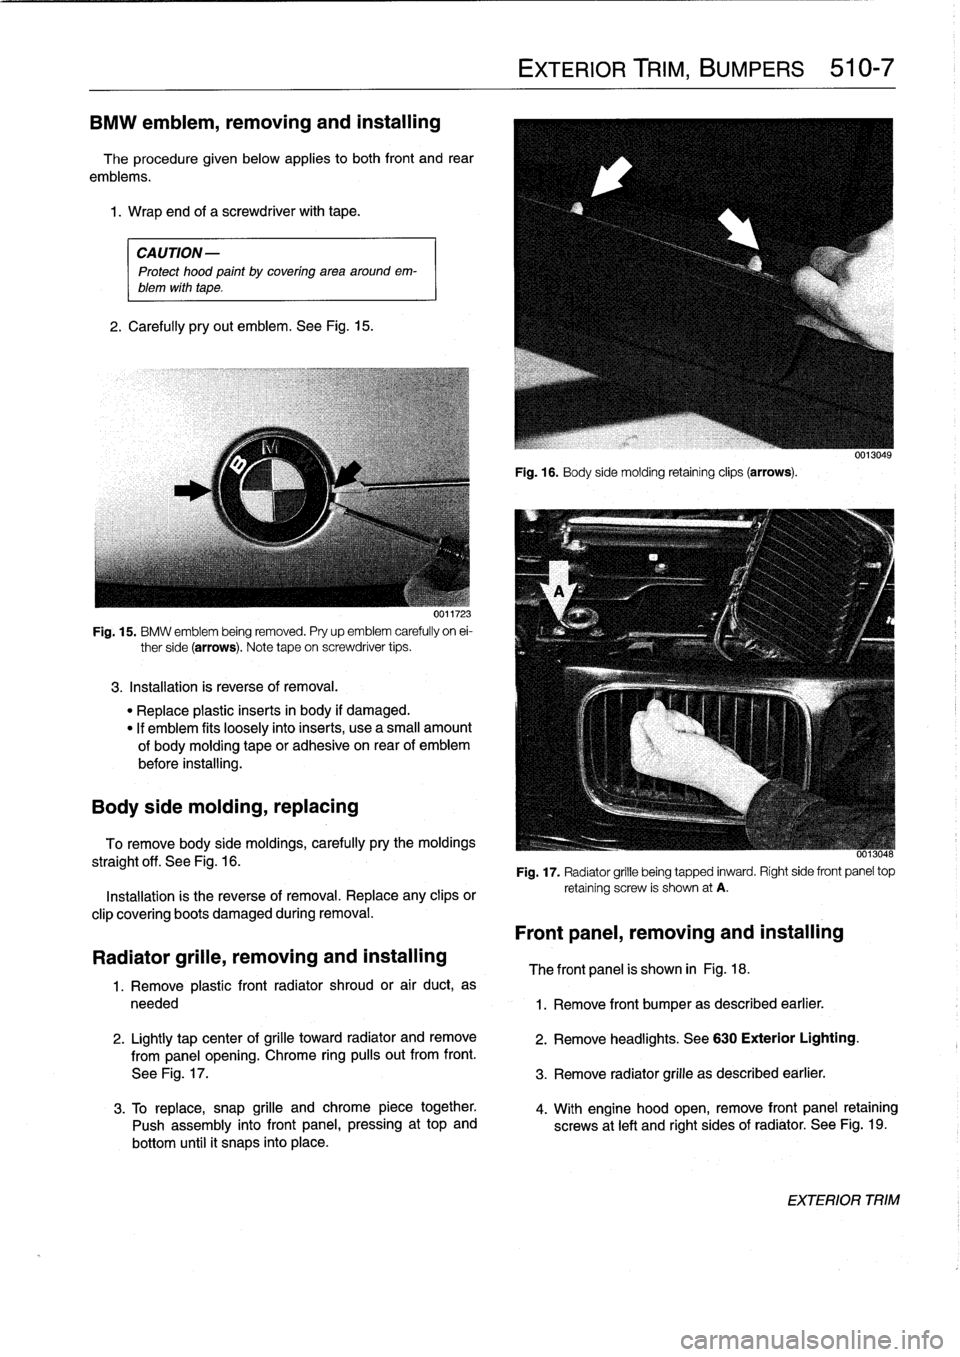 BMW 323i 1997 E36 Workshop Manual 
BMW
emblem,
removing
and
installing

The
procedure
given
below
applies
to
both
front
and
rear

emblems
.

1
.
Wrap
and
of
a
screwdriver
with
tape
.

CAUTION-

Protect
hood
paint
by
coveringarea
aroun